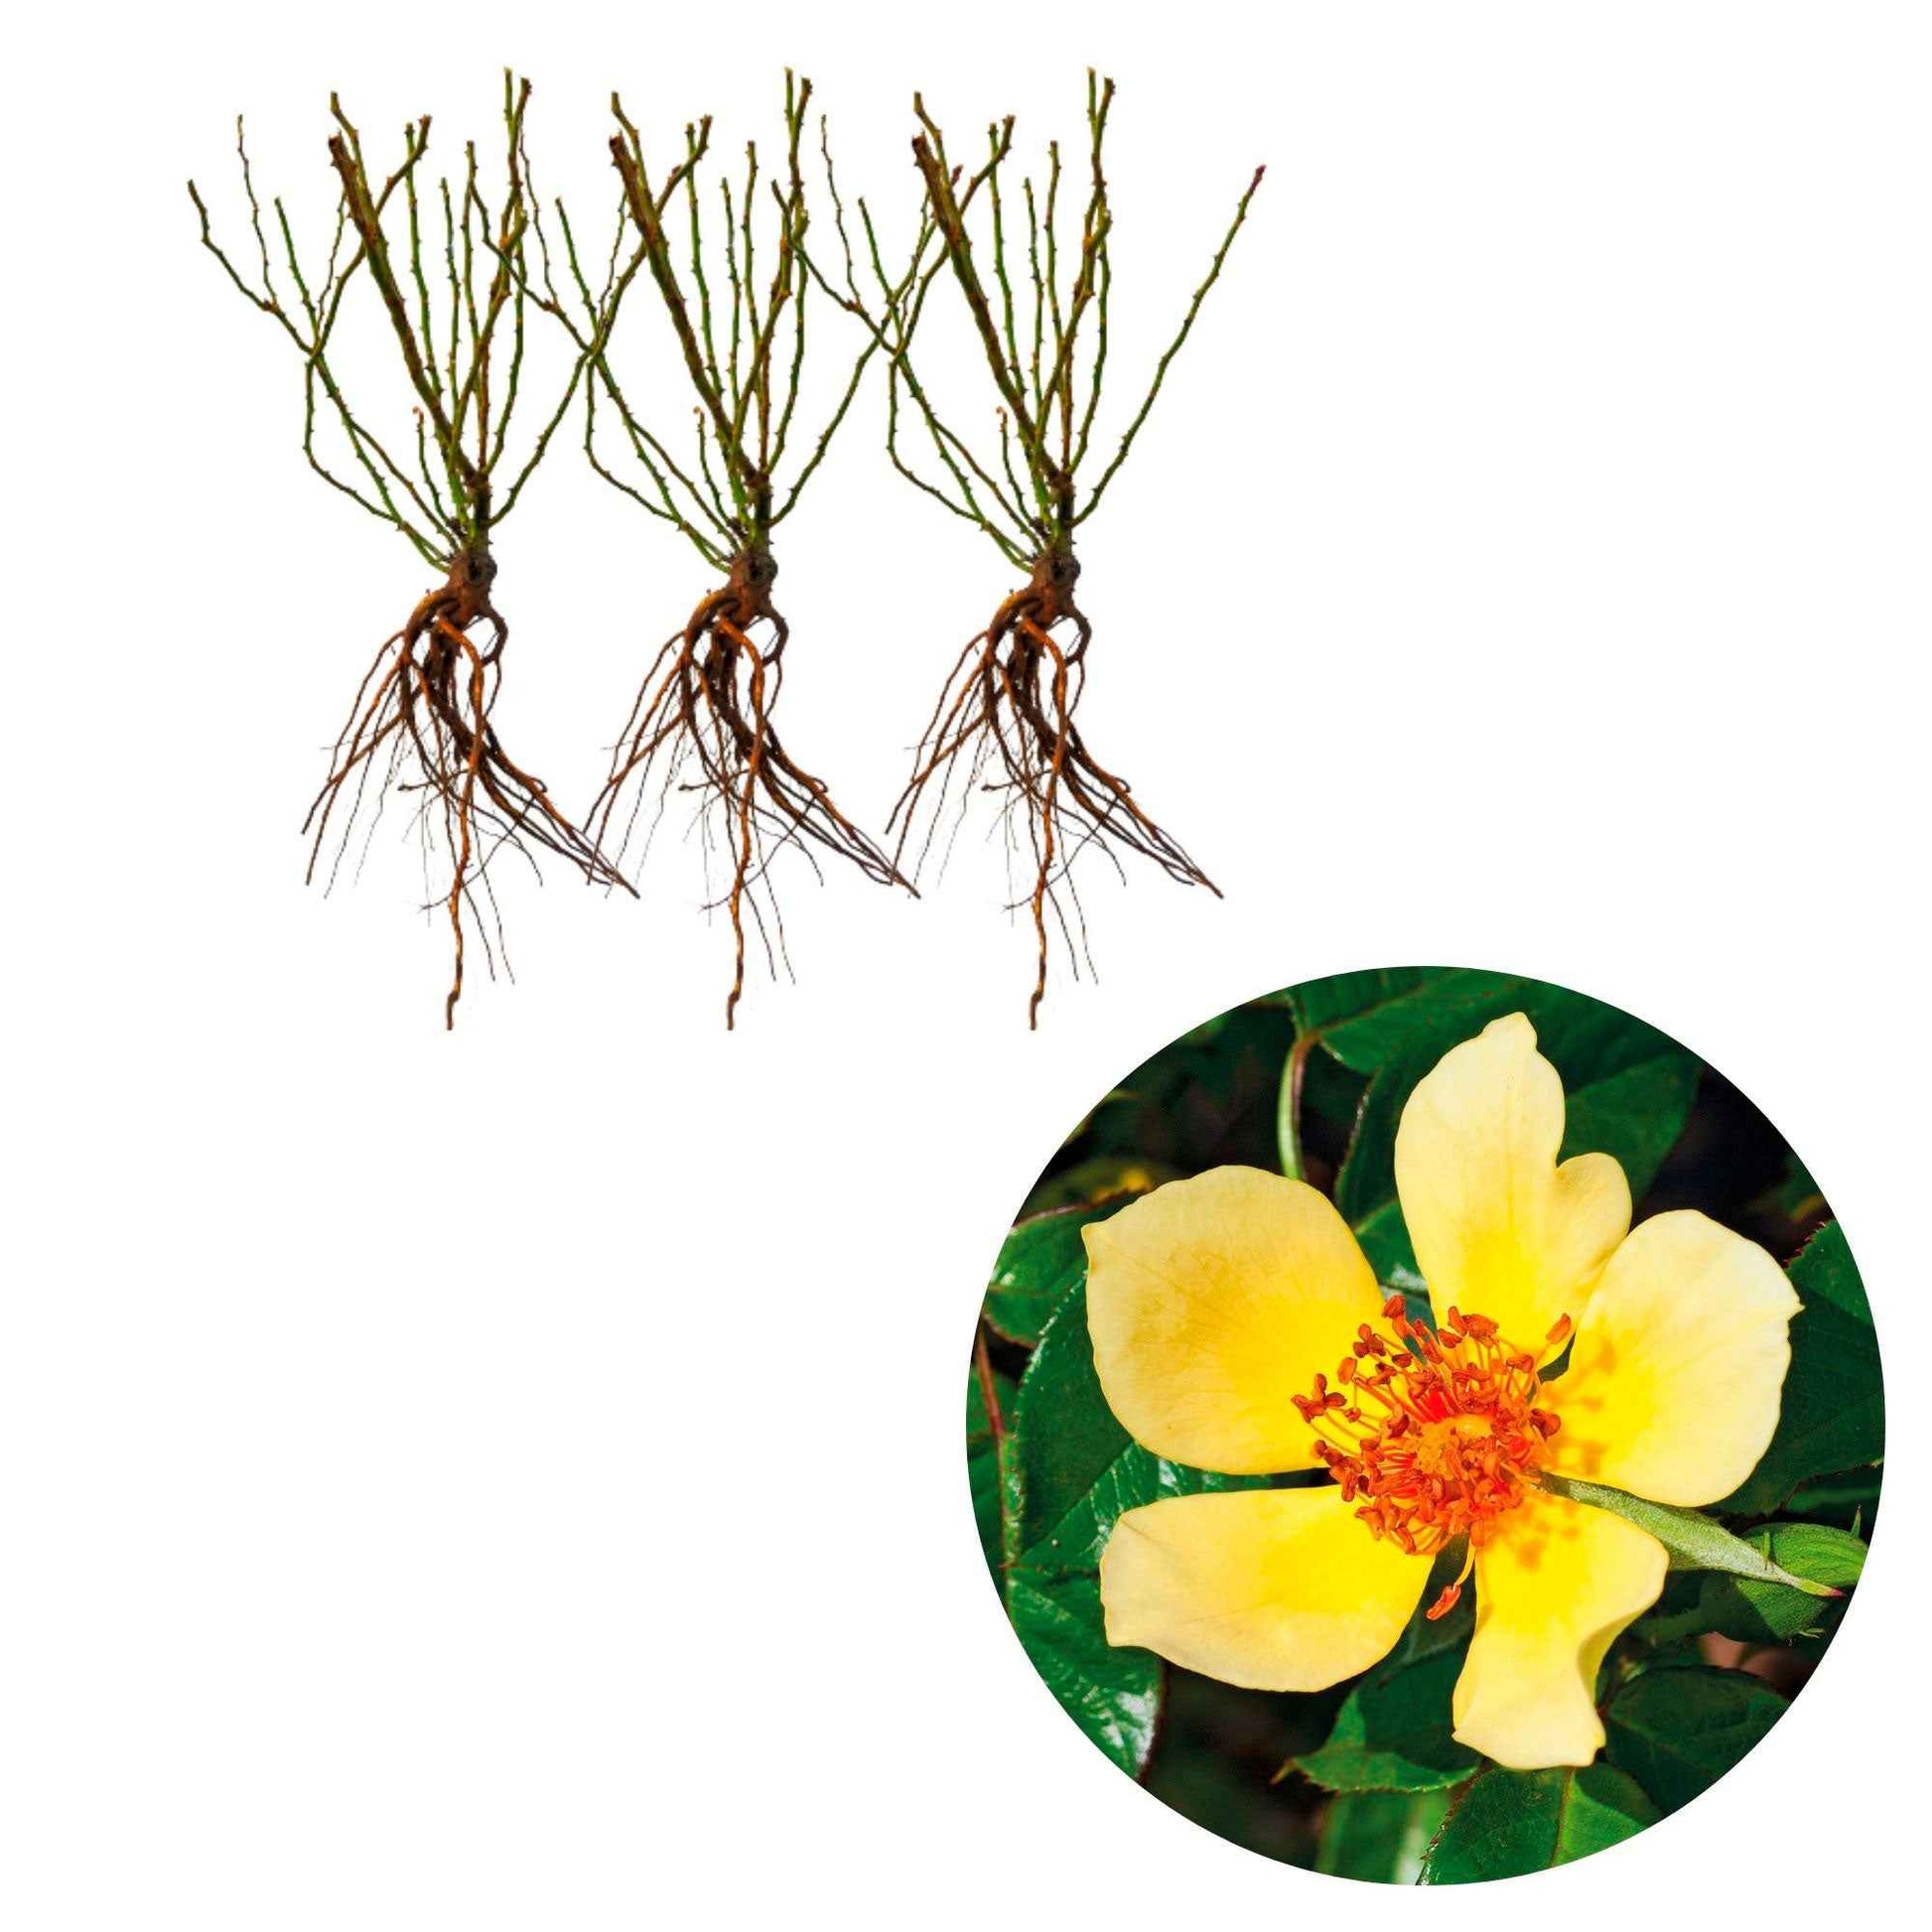 3x Rozen Rosa 'Ducat Mella'® Geel  - Bare rooted - Winterhard - Rozen - Bare rooted